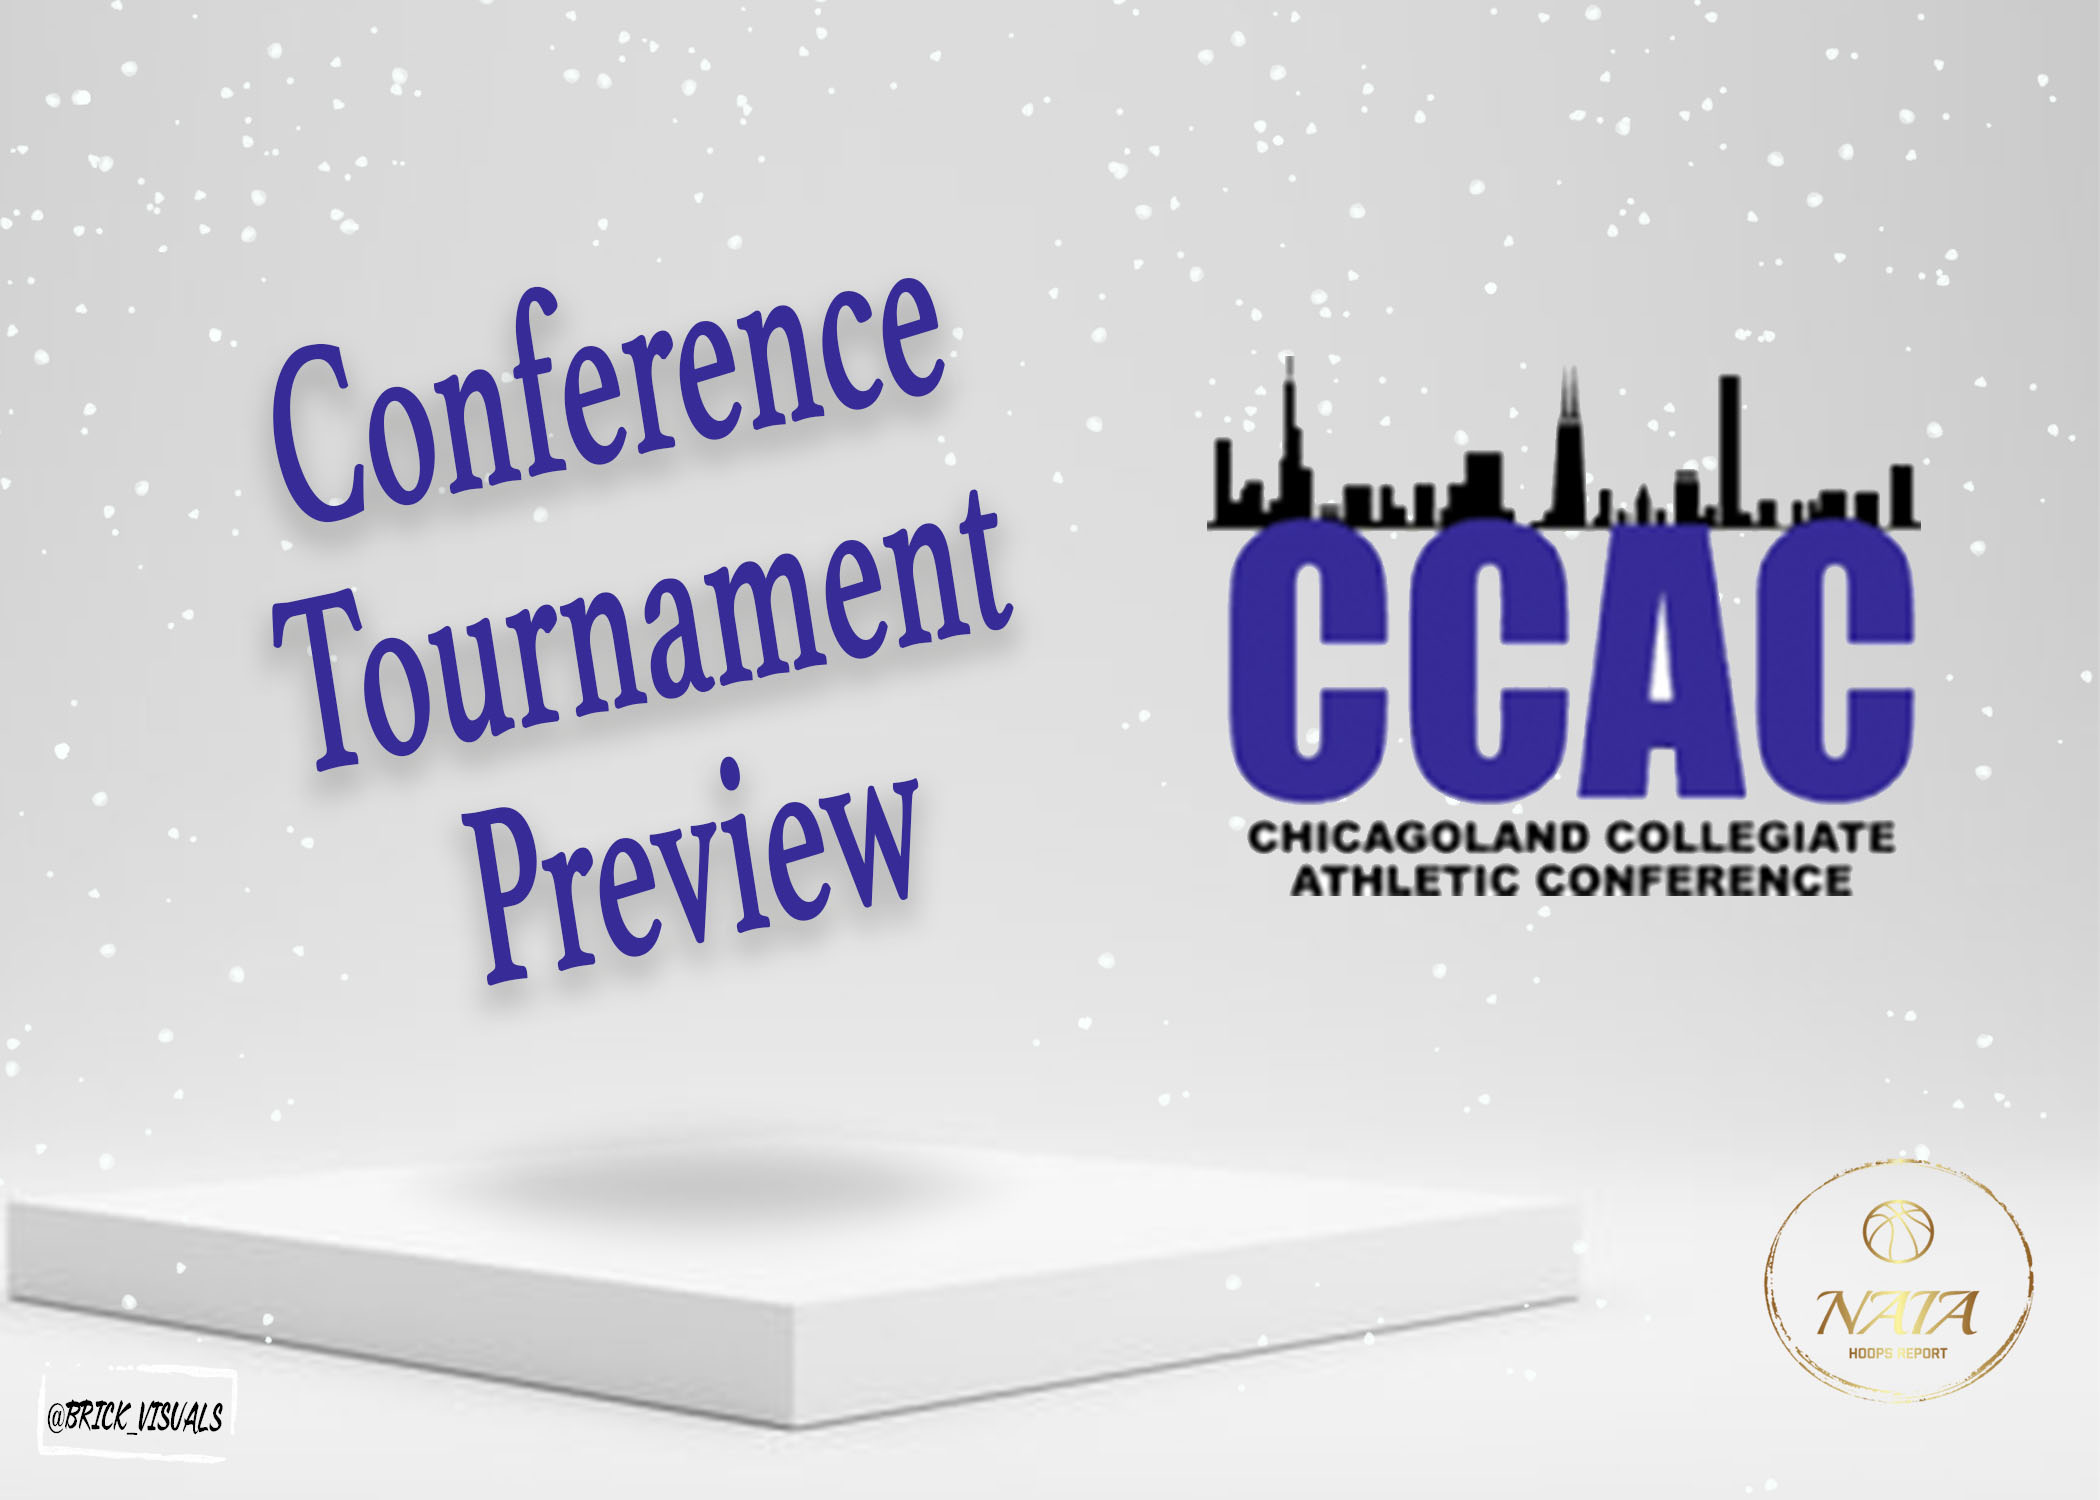 Chicagoland Collegiate Athletic Conference Tournament – Championship Preview